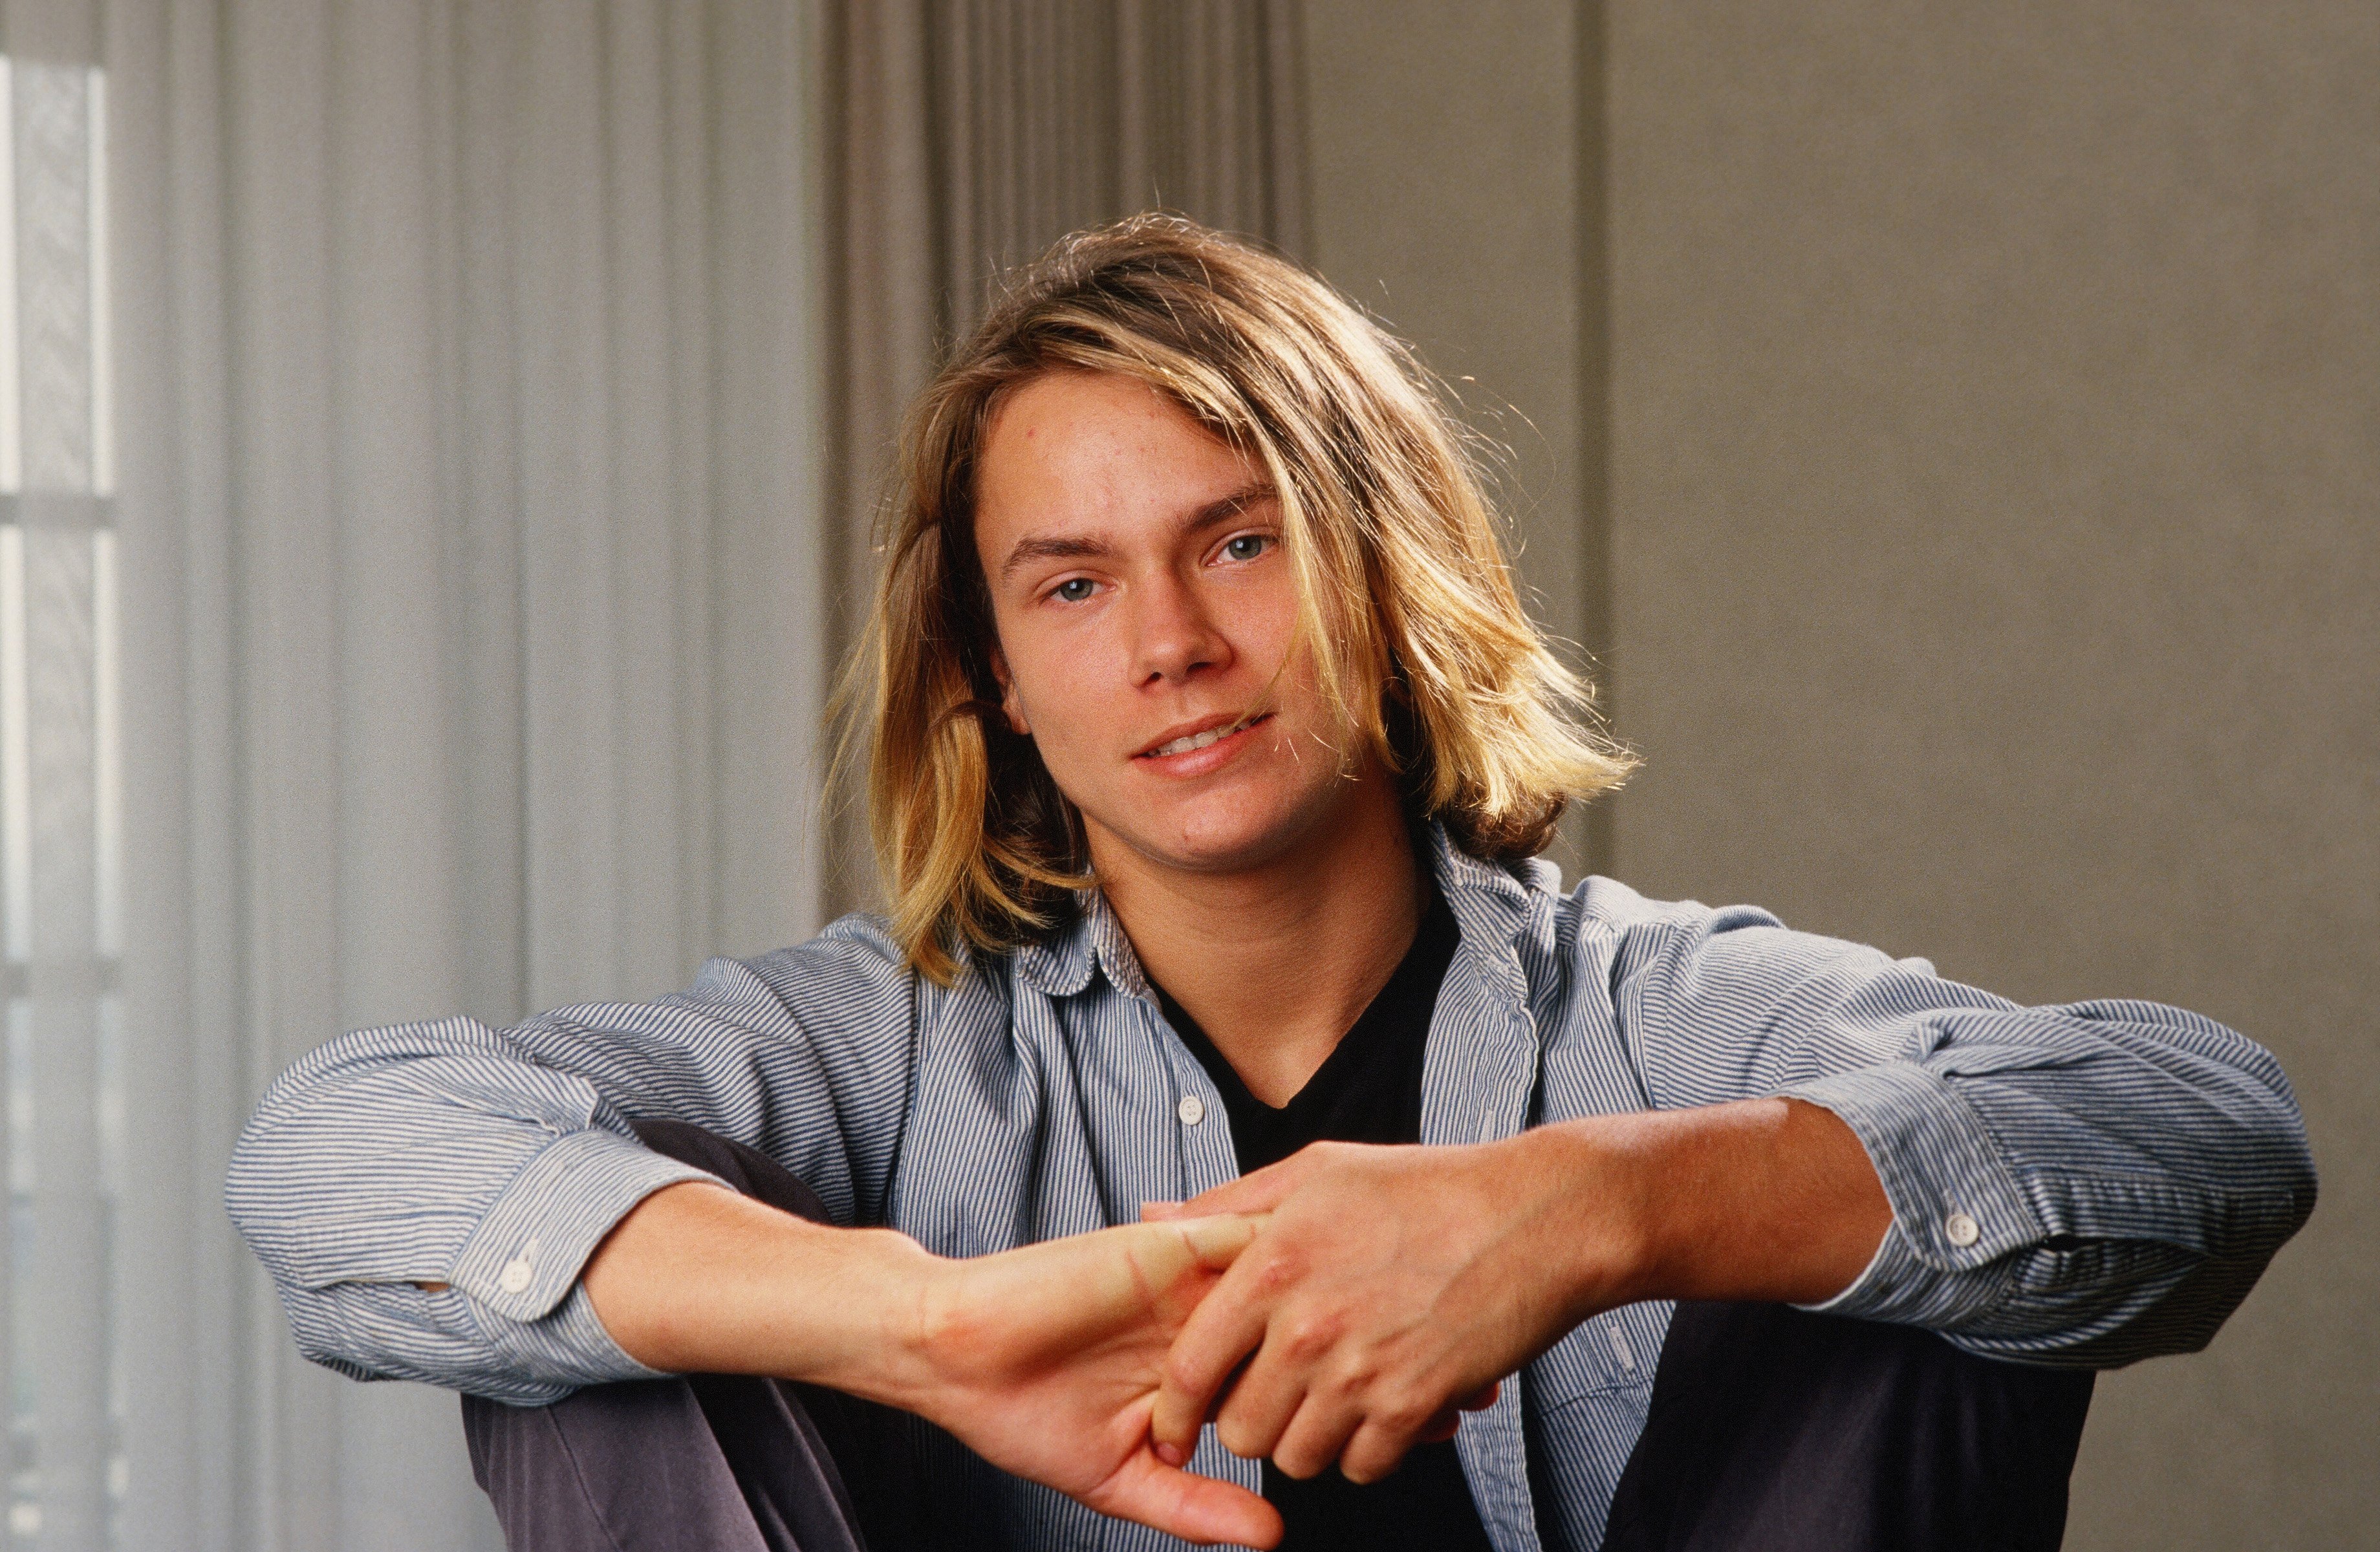 River Phoenix, star of "Stand By Me," playfully poses during a 1988 Los Angeles, California, photo portrait session | Photo: GettyImages